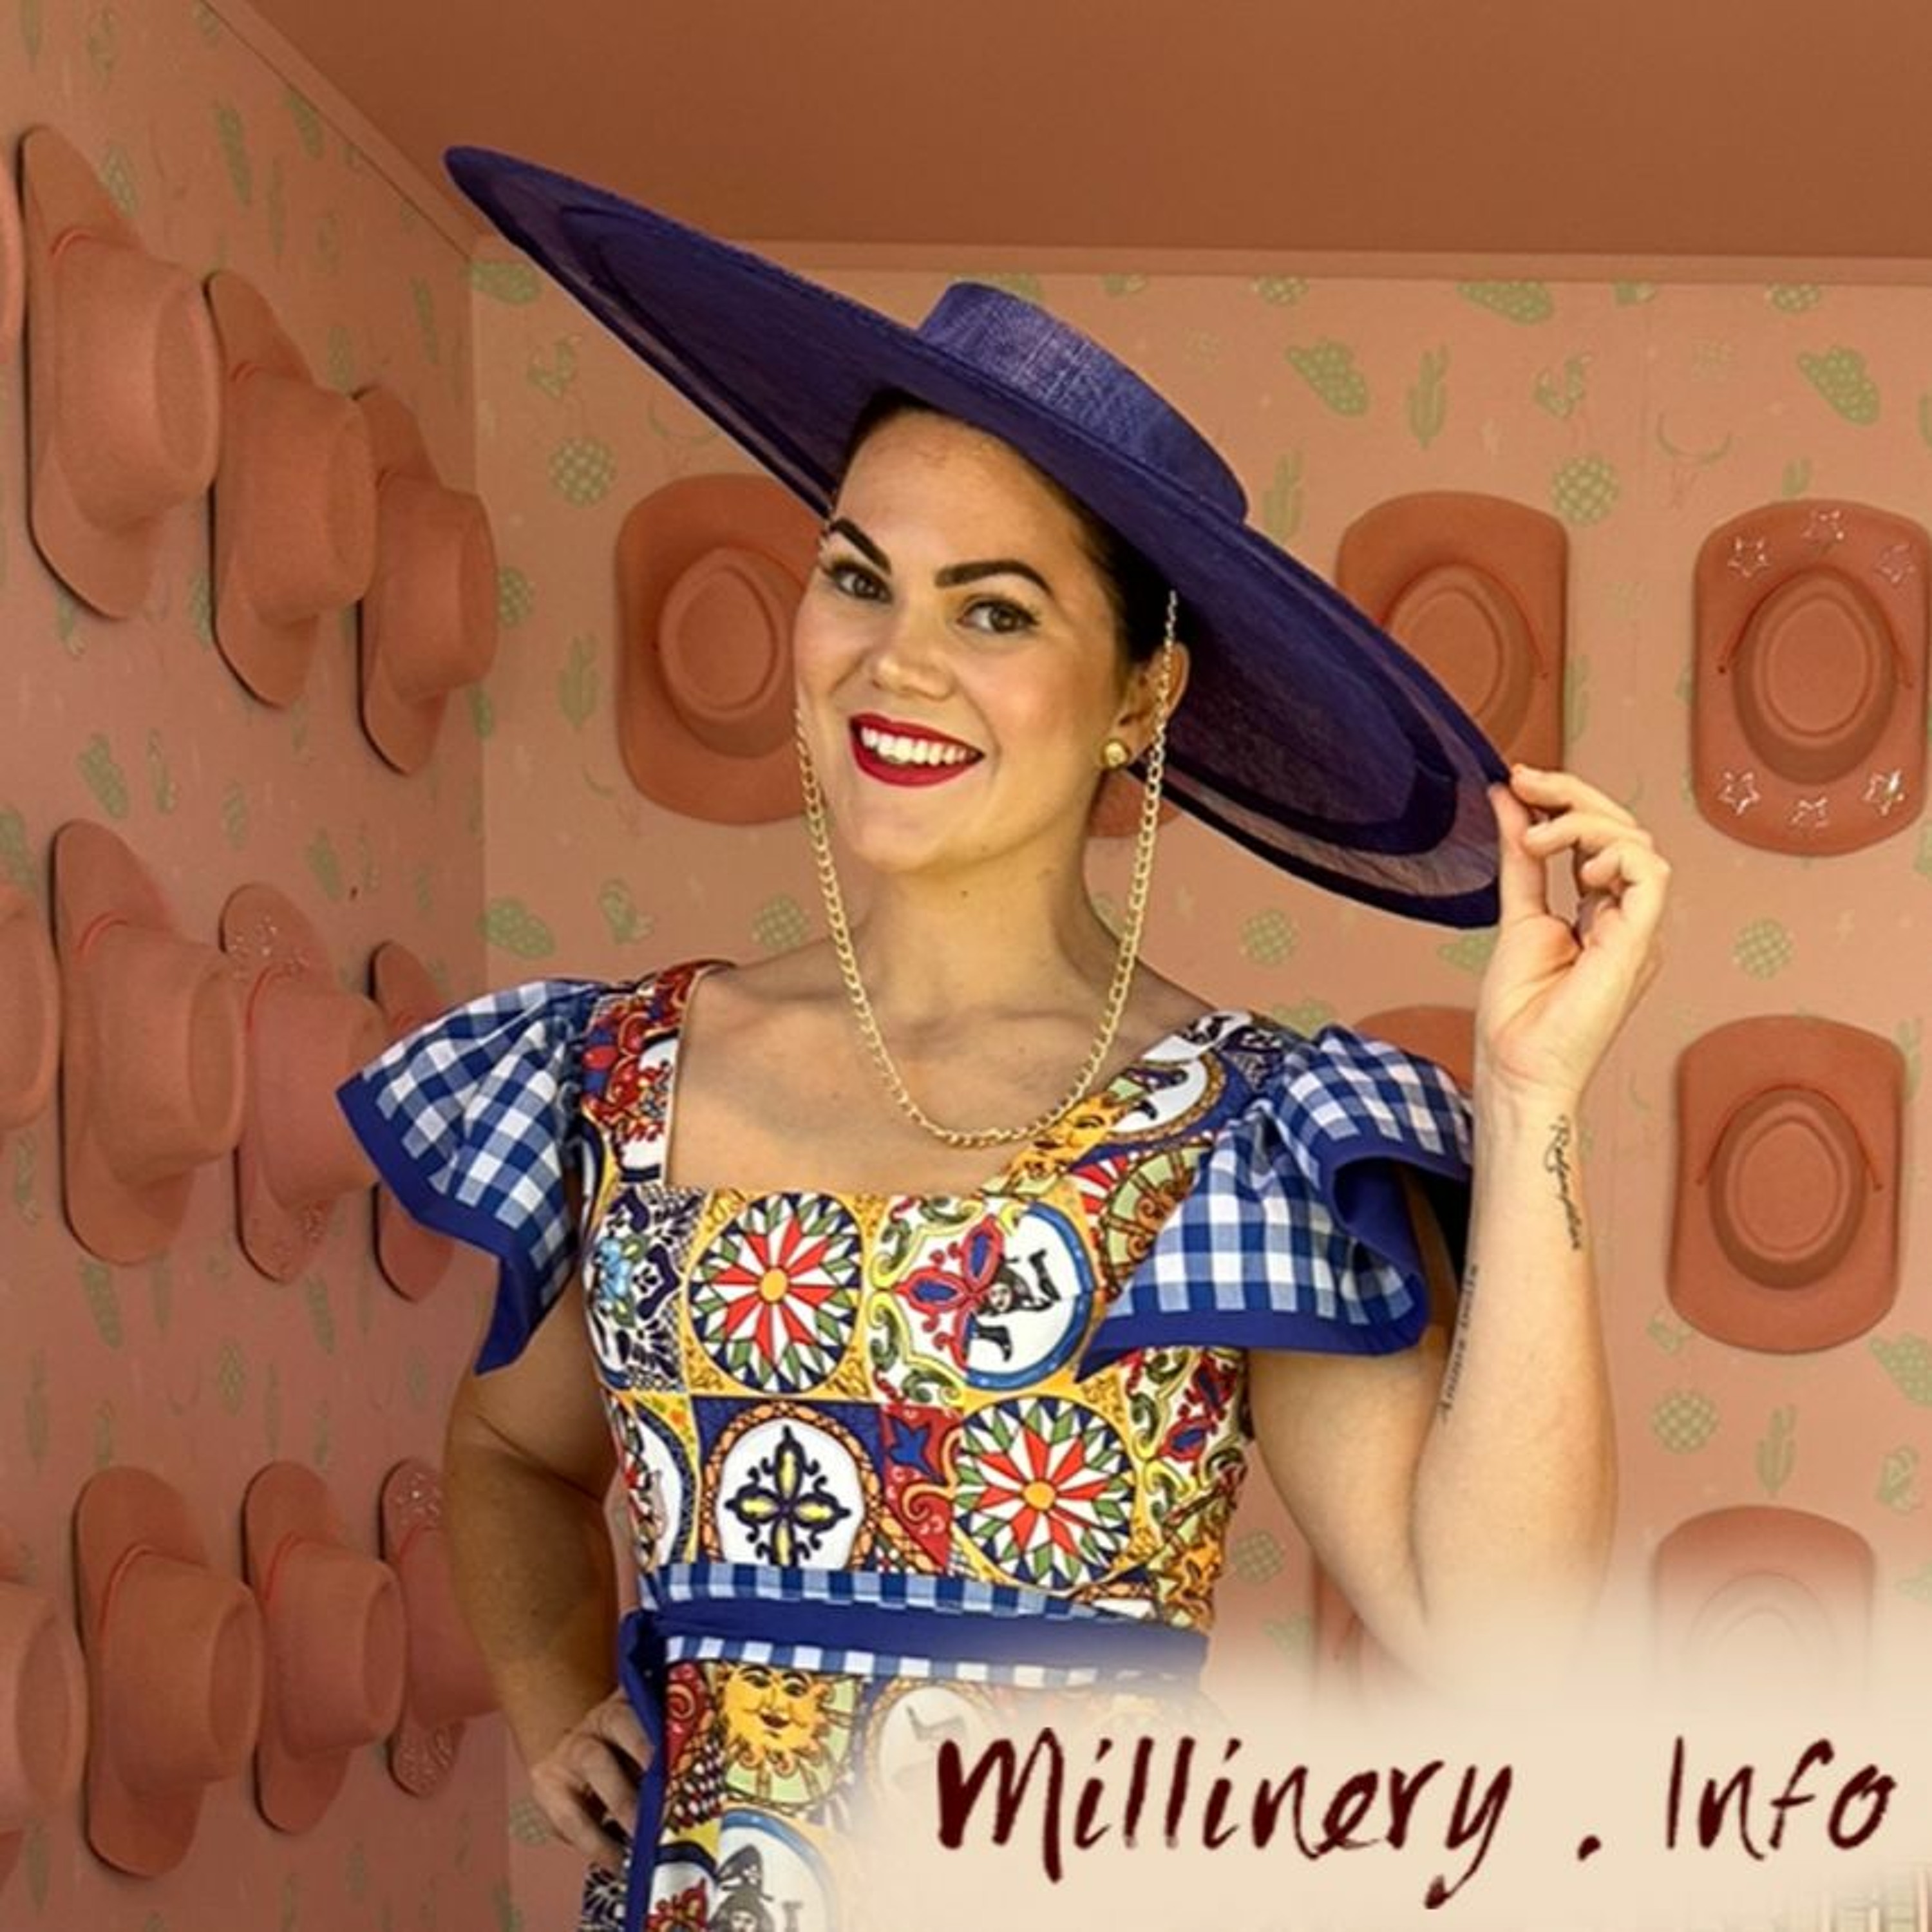 Natalie Taylor Of N.A.T Millinery - Millinery.Info Podcast